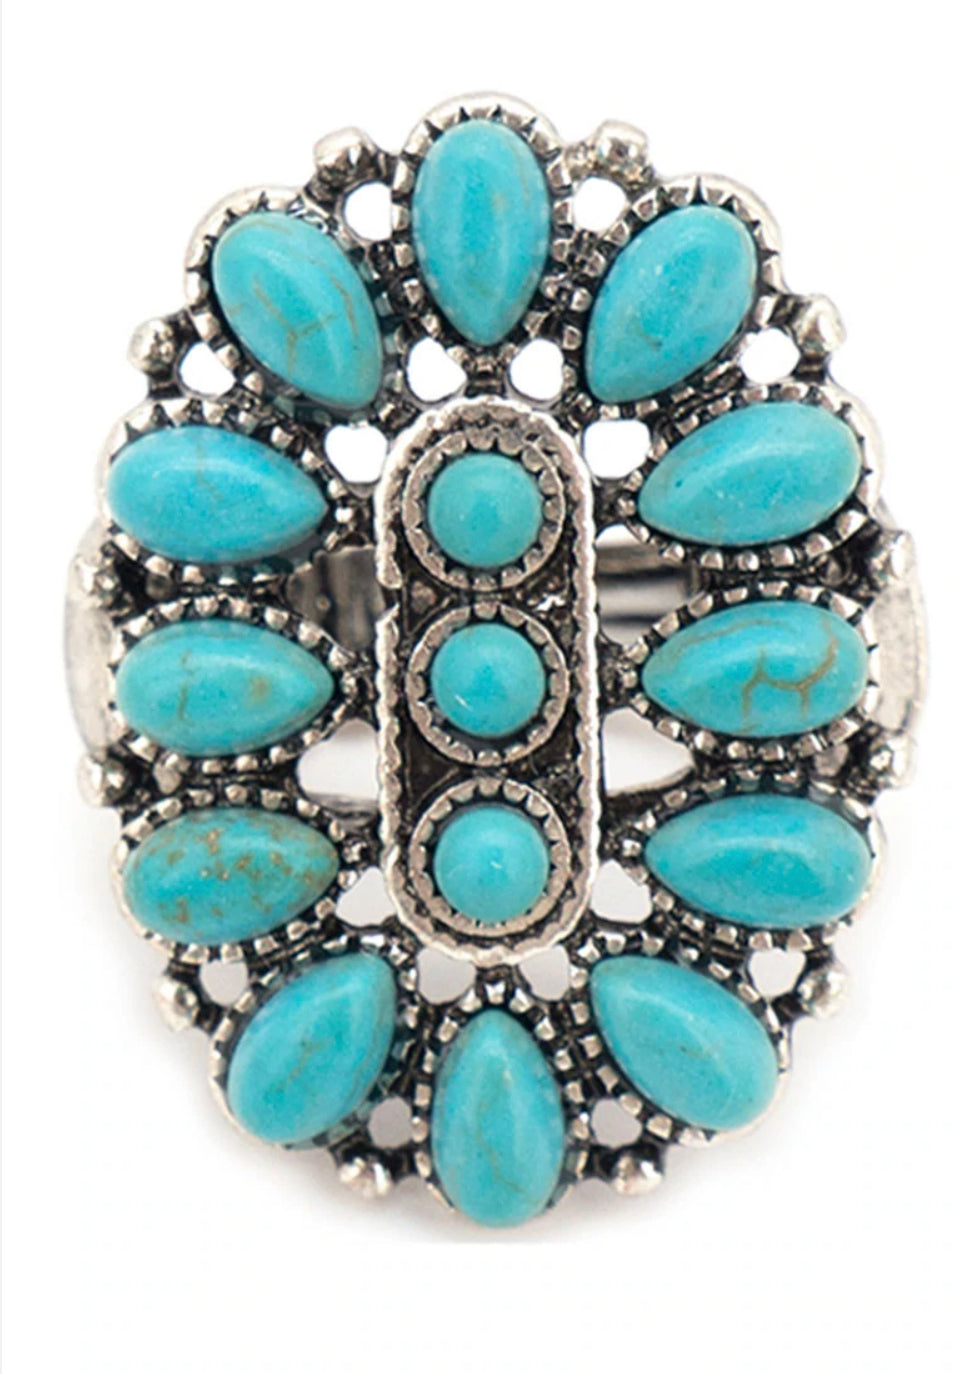 SARATOGA SPRINGS TURQUOISE BEADED CONCHO RING